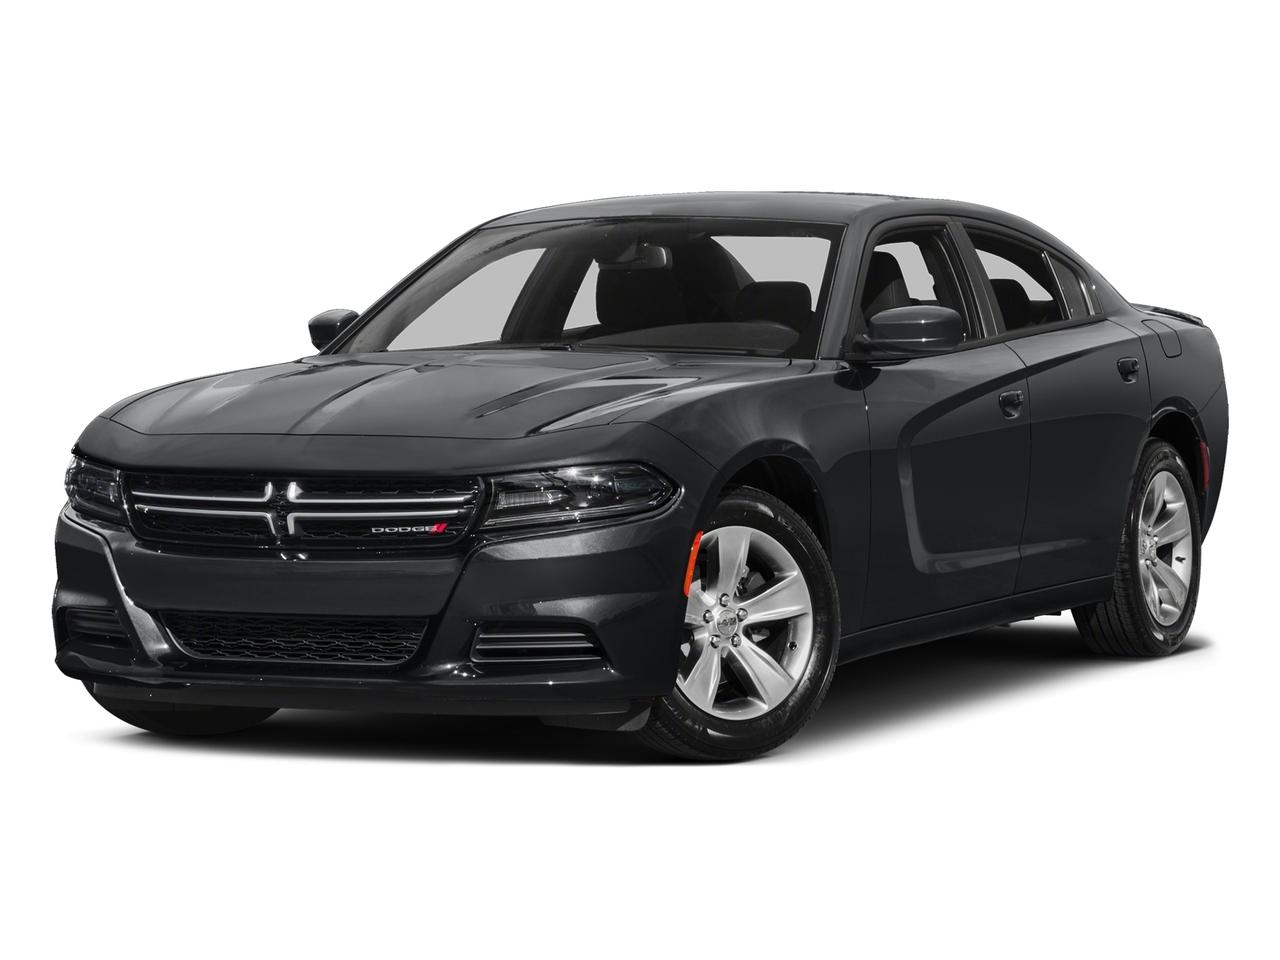 2015 Dodge Charger Vehicle Photo in Saint Charles, IL 60174